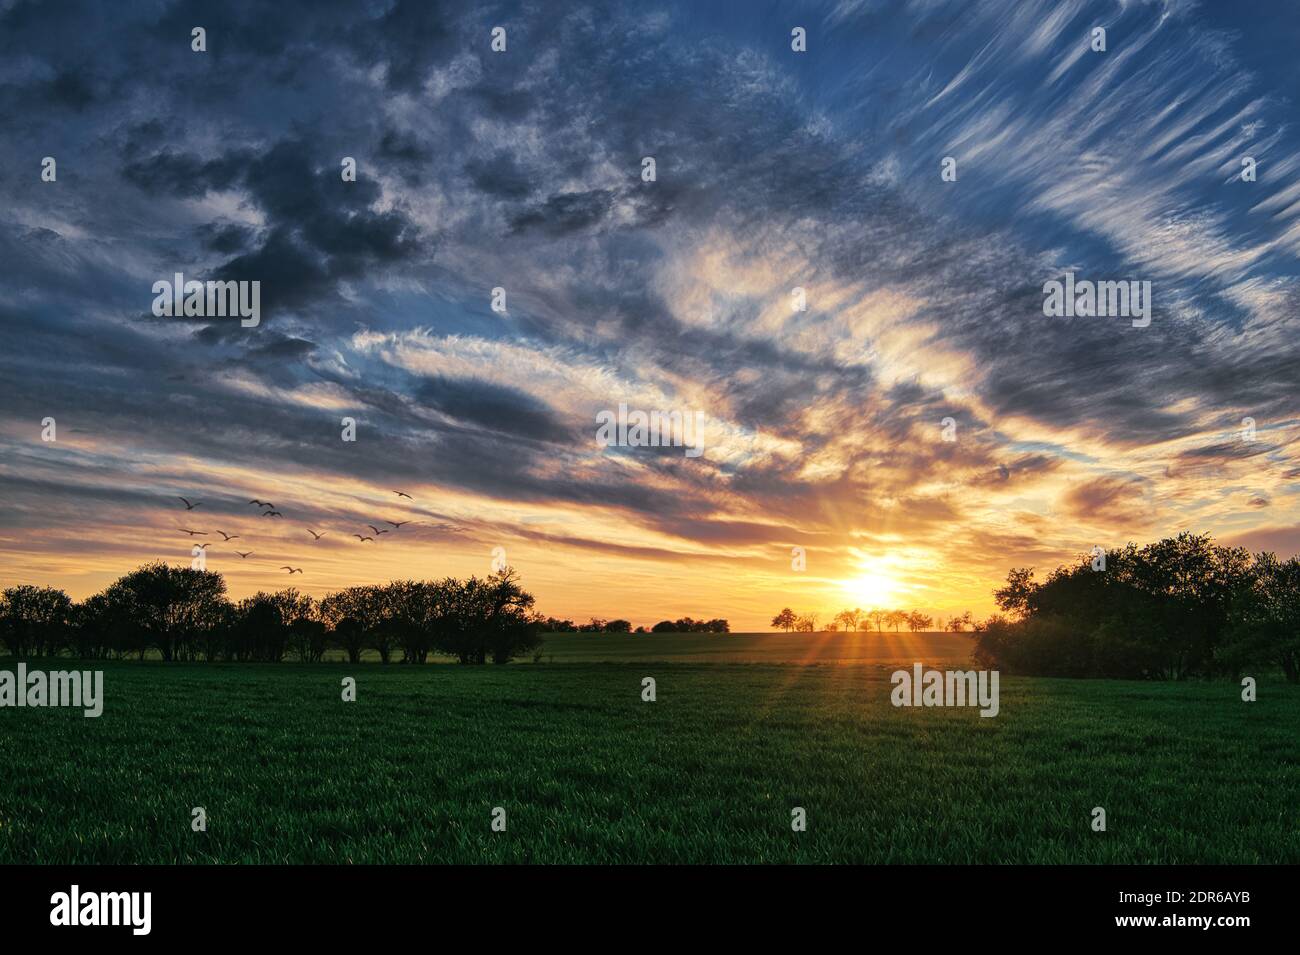 Sunset on a meadow with green grass and silhouettes of trees. The sky is full of colorful clouds. Sunbeams and beautiful spring colors. Stock Photo